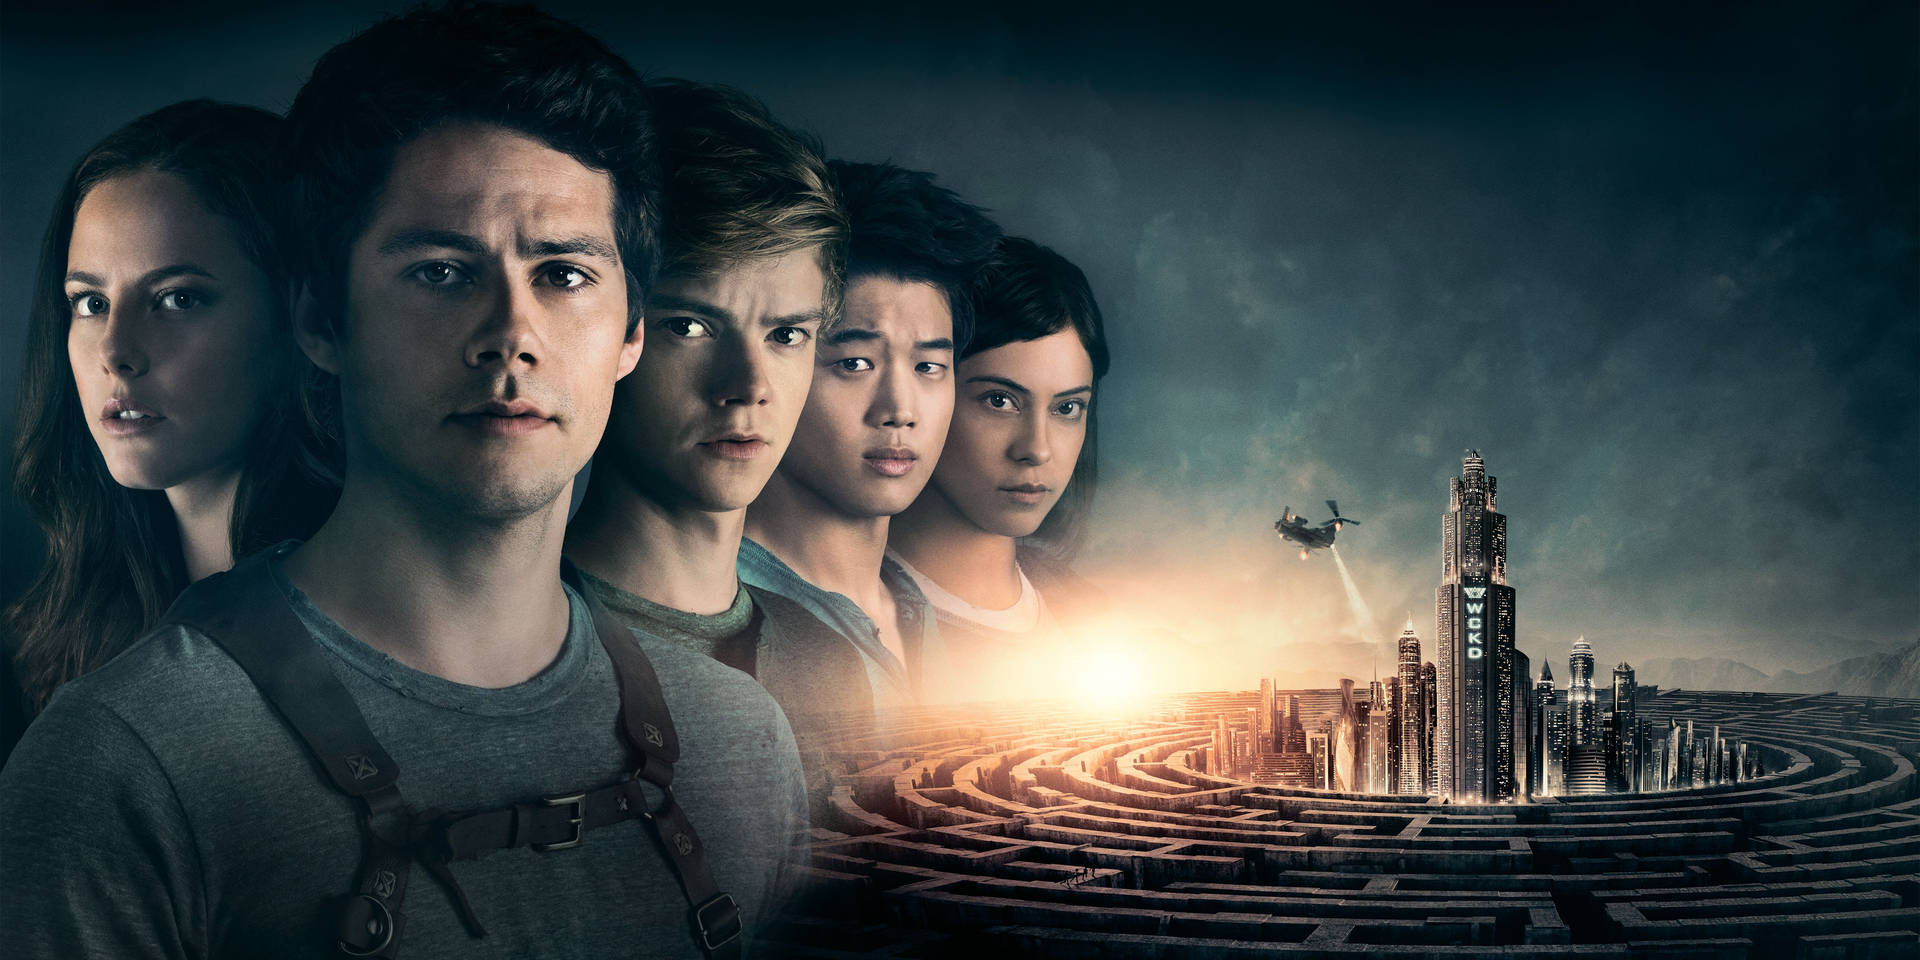 The Brave Protagonists Of Maze Runner Facing The Enigmatic Wckd. Background